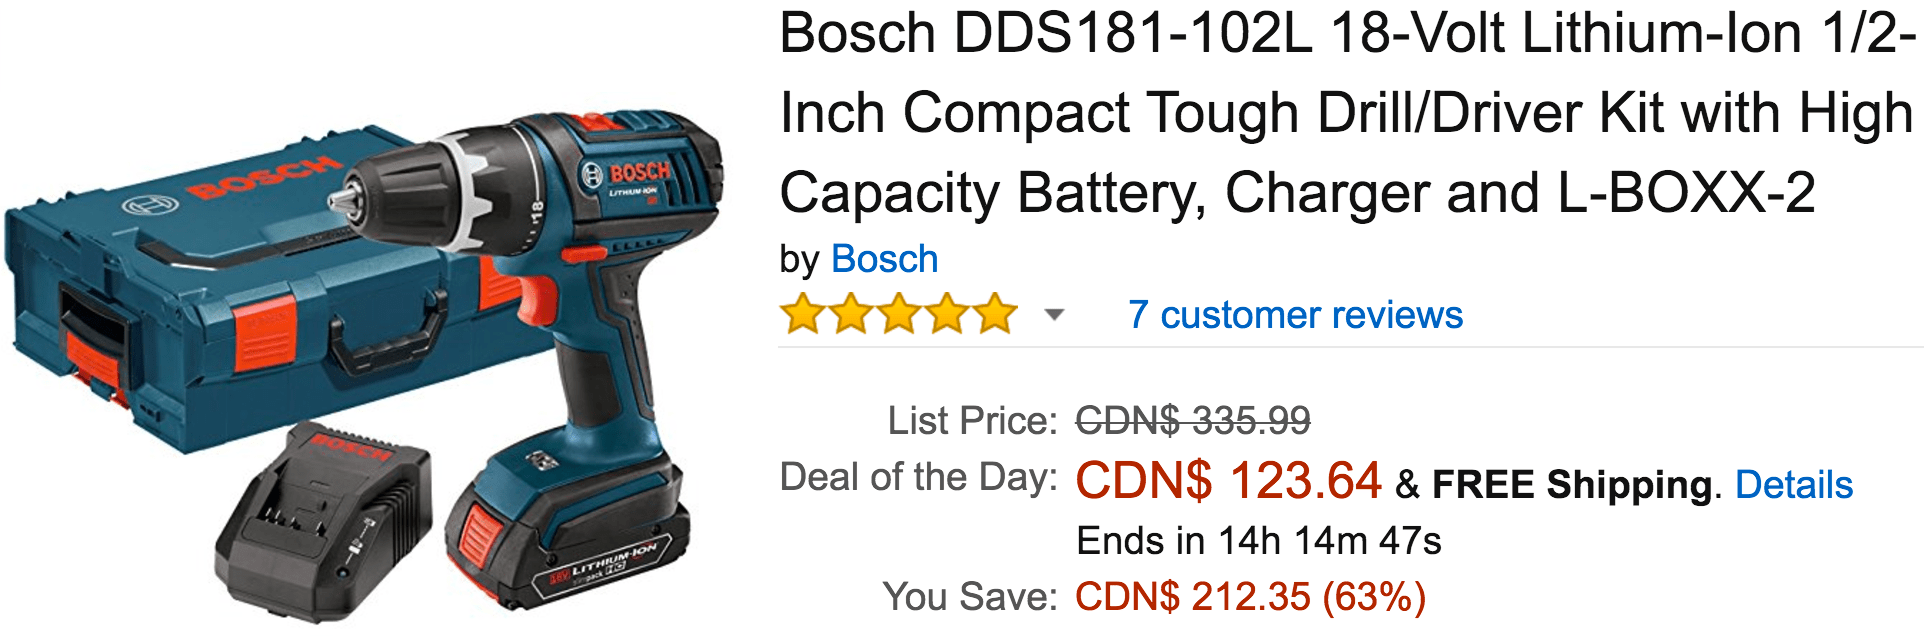 Amazon Canada Deals Of The Day Save 63 On Bosch Tools 40 Off